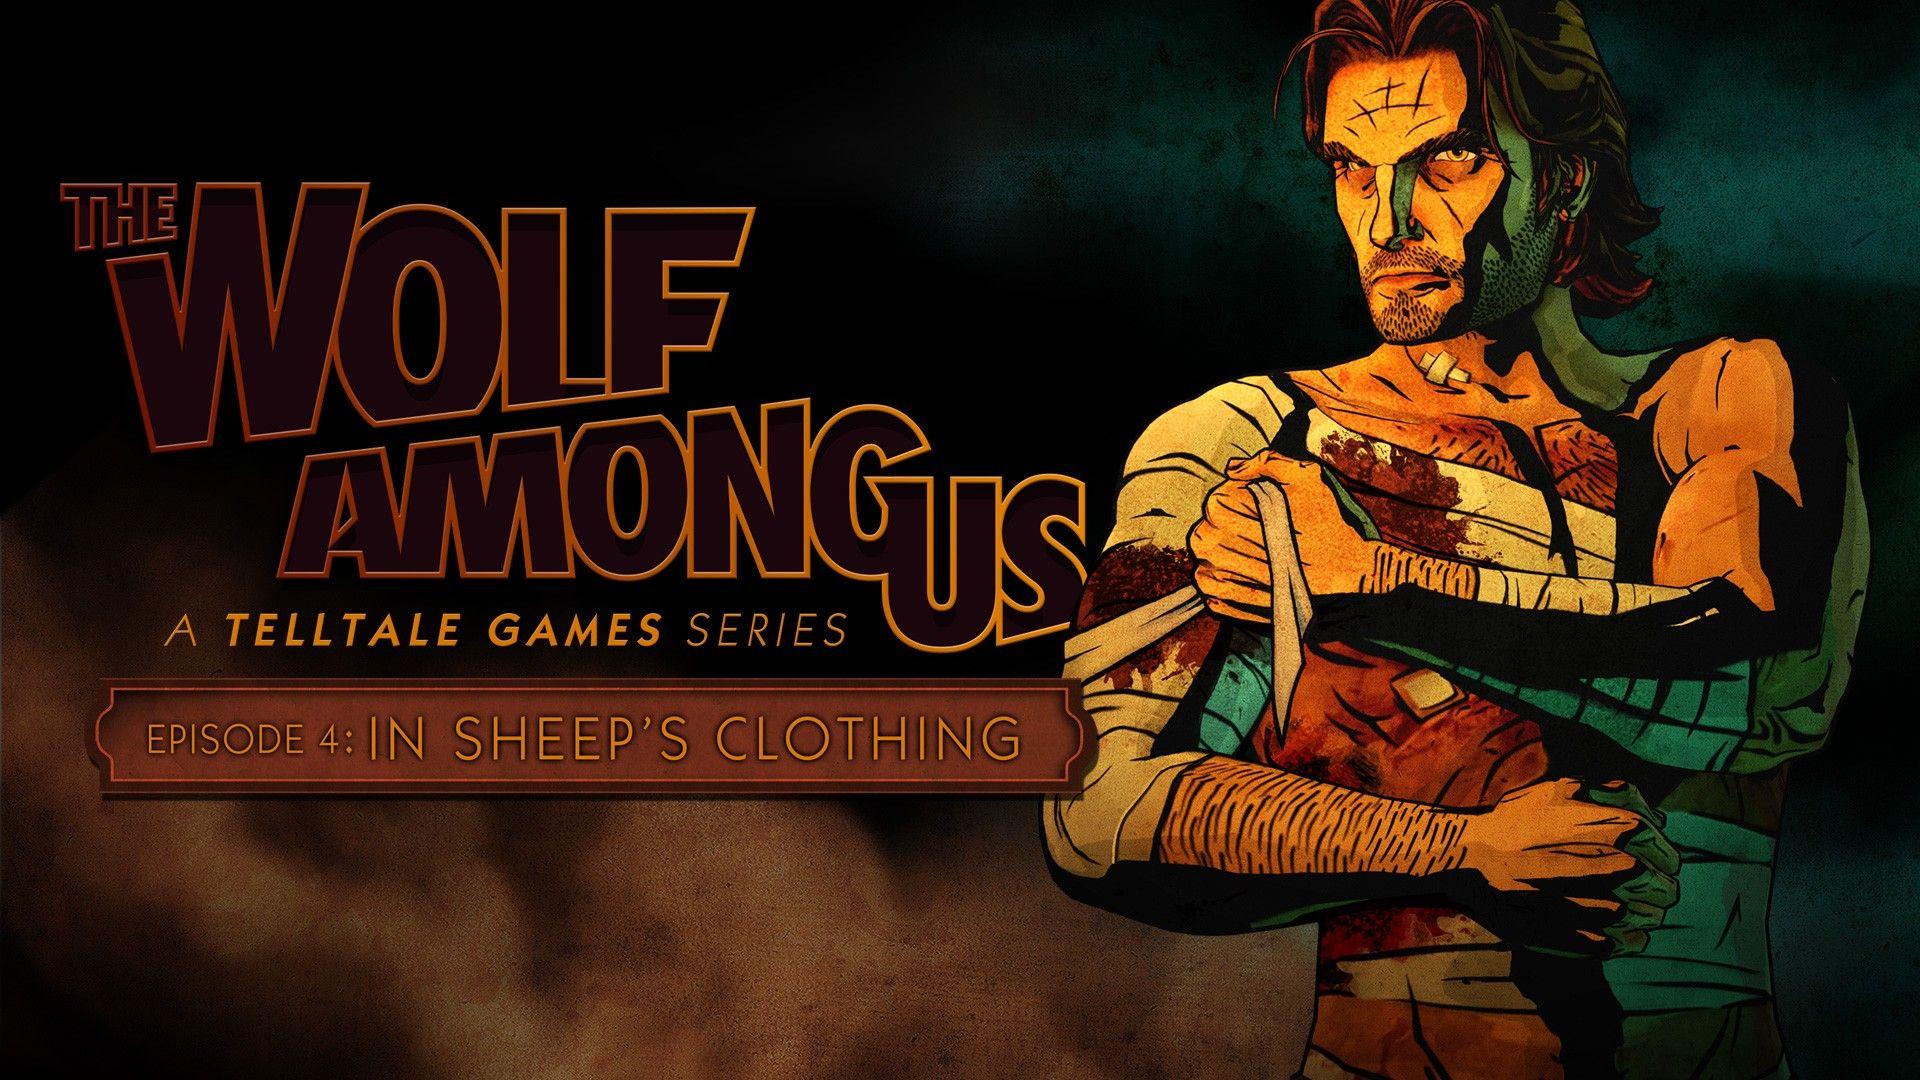 the Wolf Among Us wallpaper for phone by limb0ist on DeviantArt